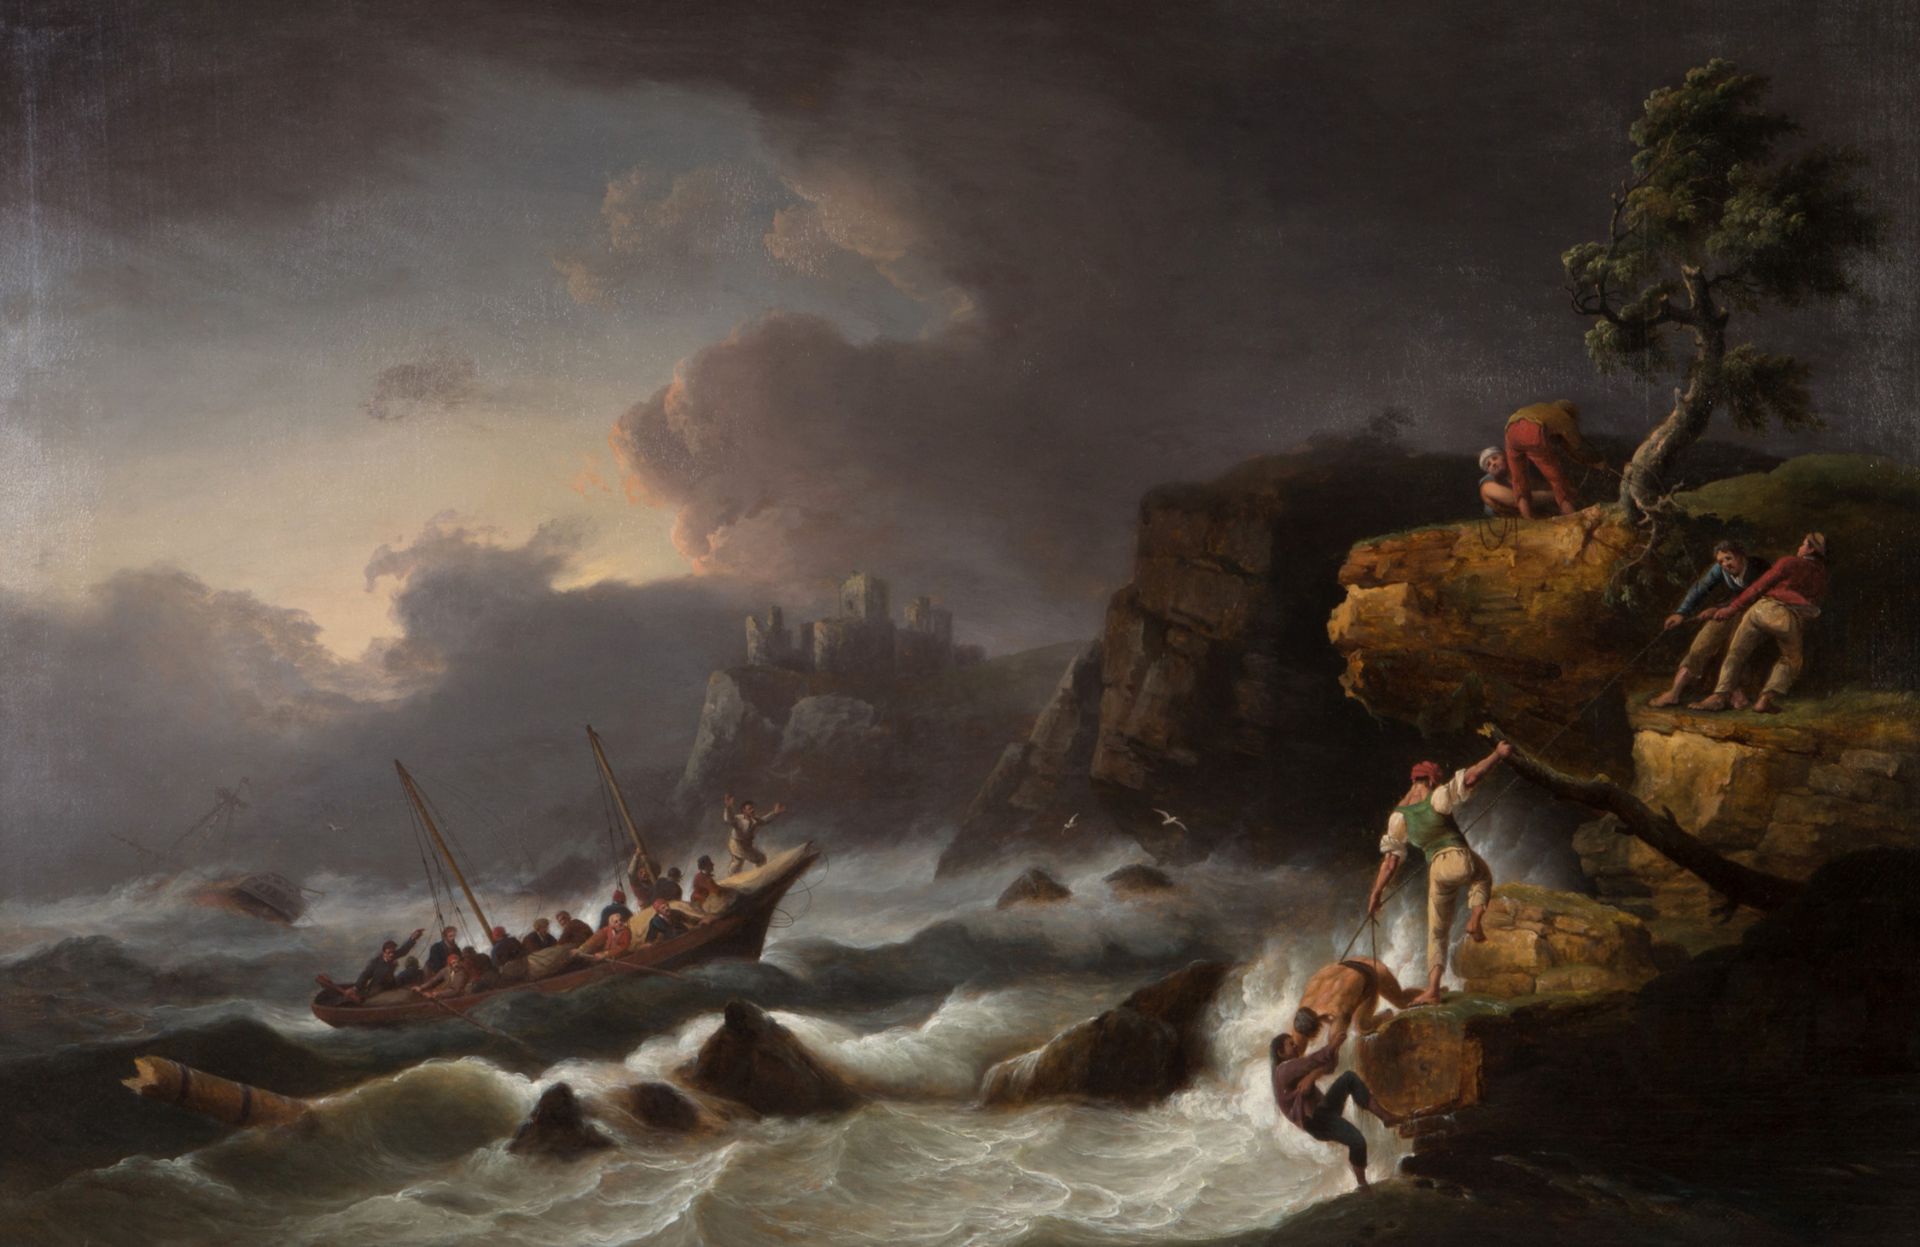 THOMAS LUNY Oil painting on canvas "SHIPWRECK" - Image 2 of 6